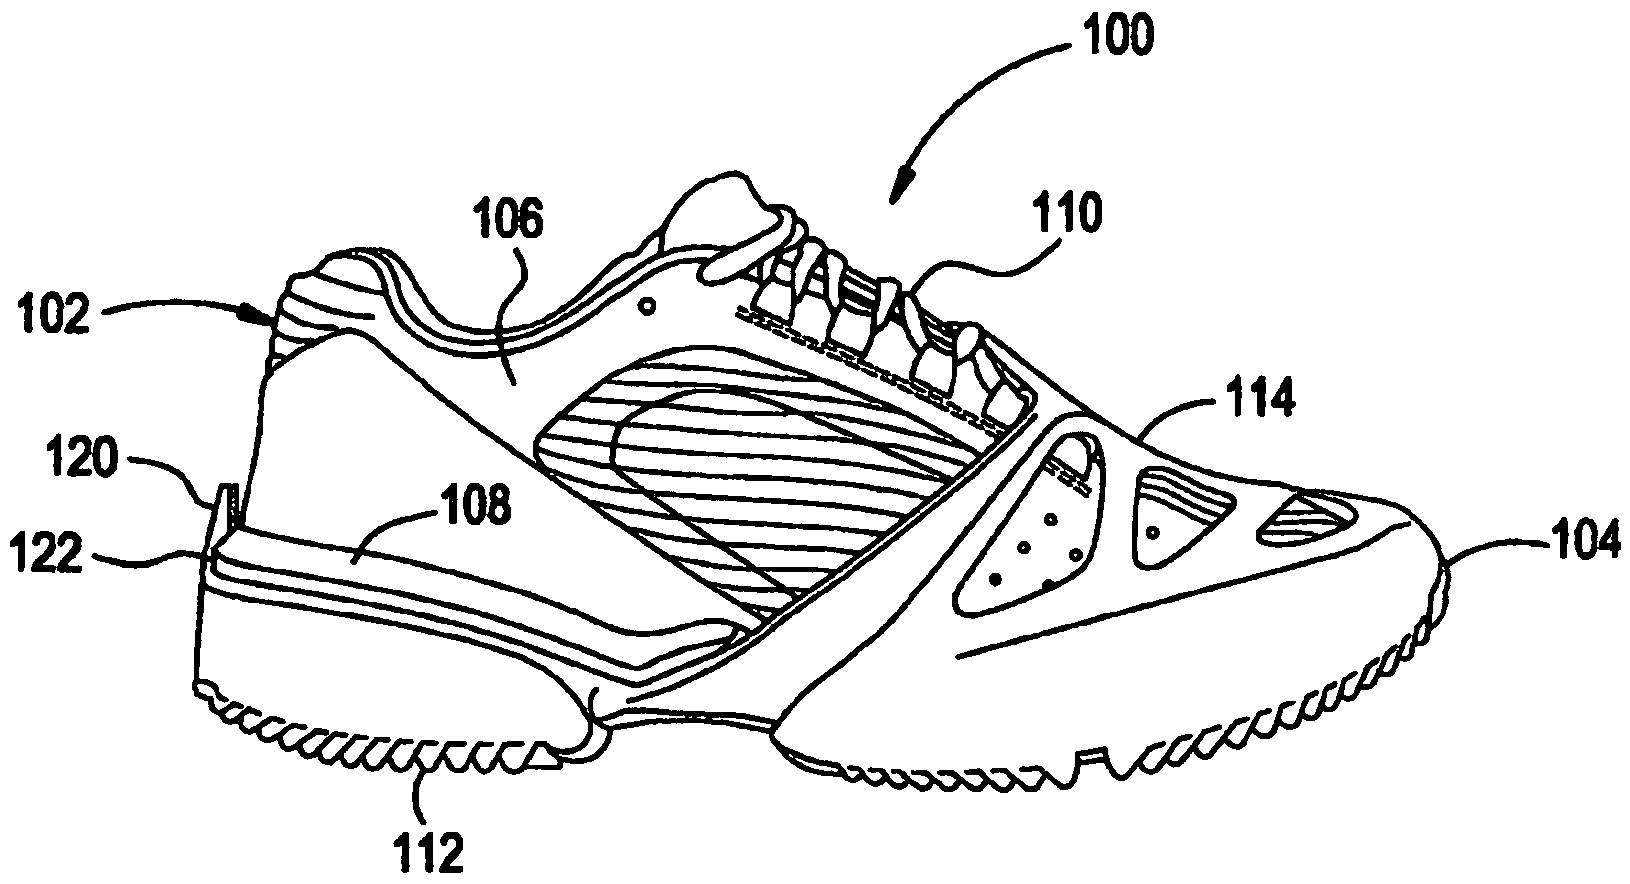 Footwear including replaceable outsole members